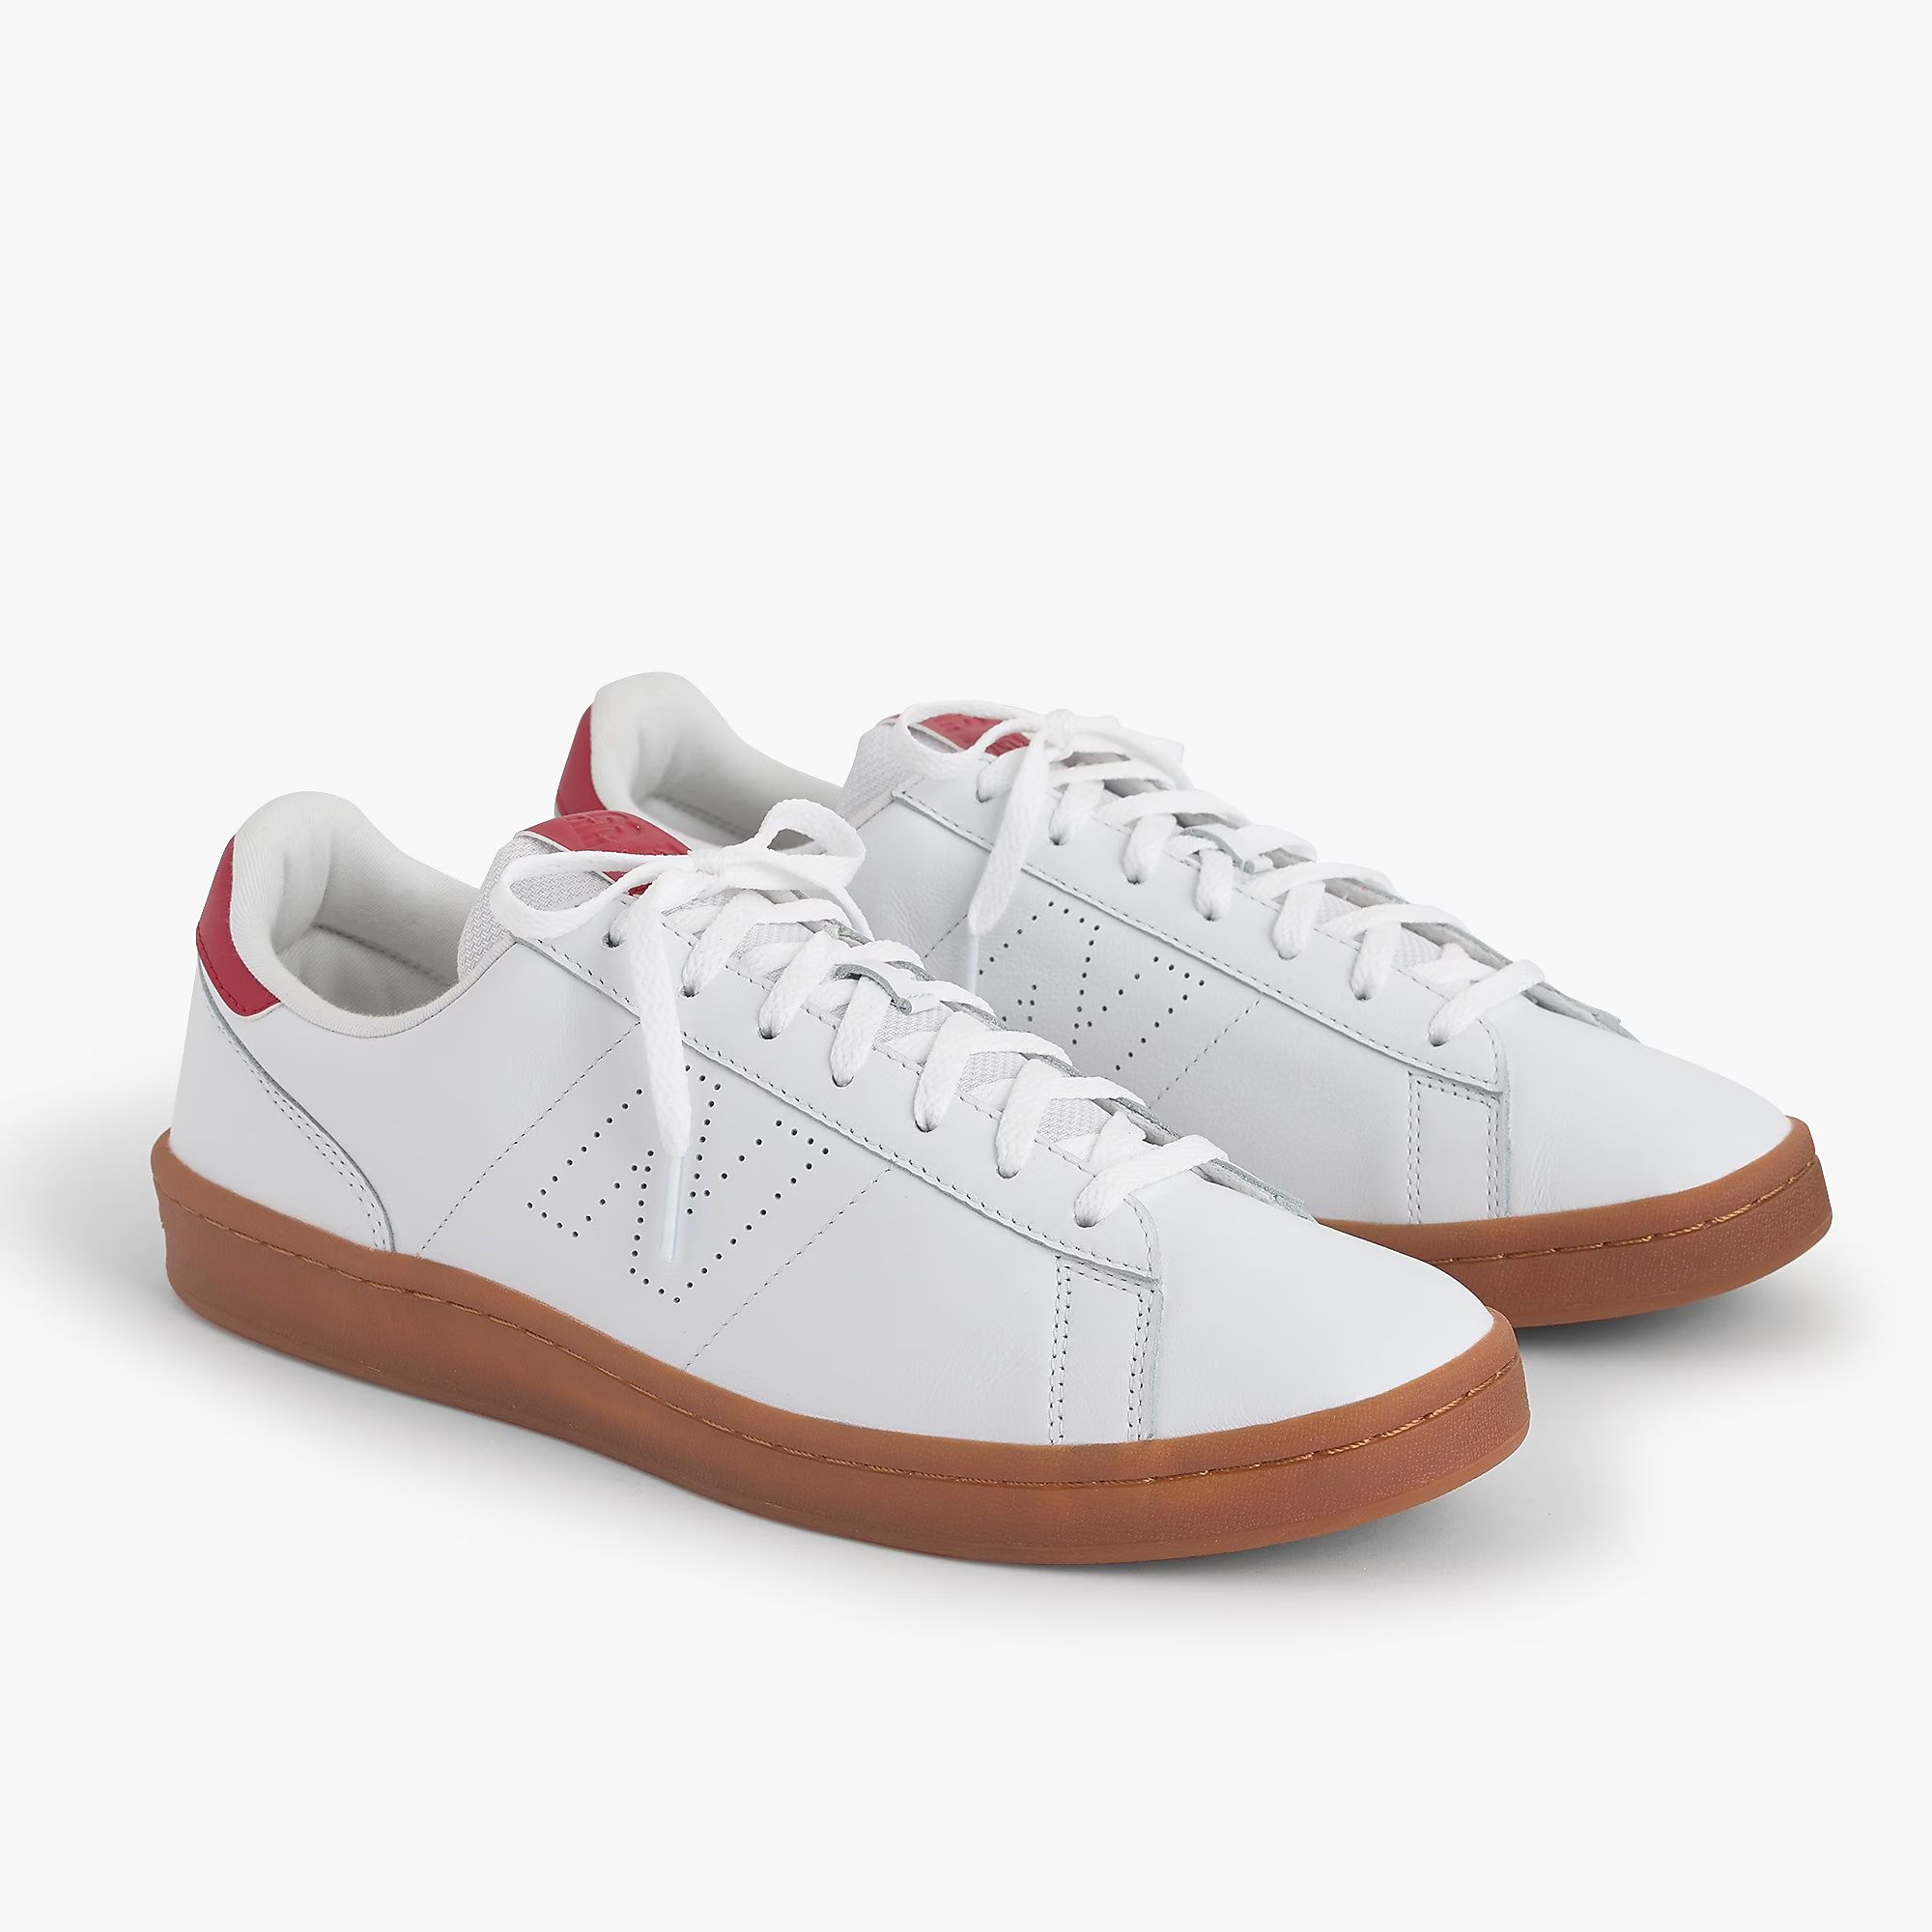 New Balance® for J.Crew 791 leather sneakers | J.Crew US